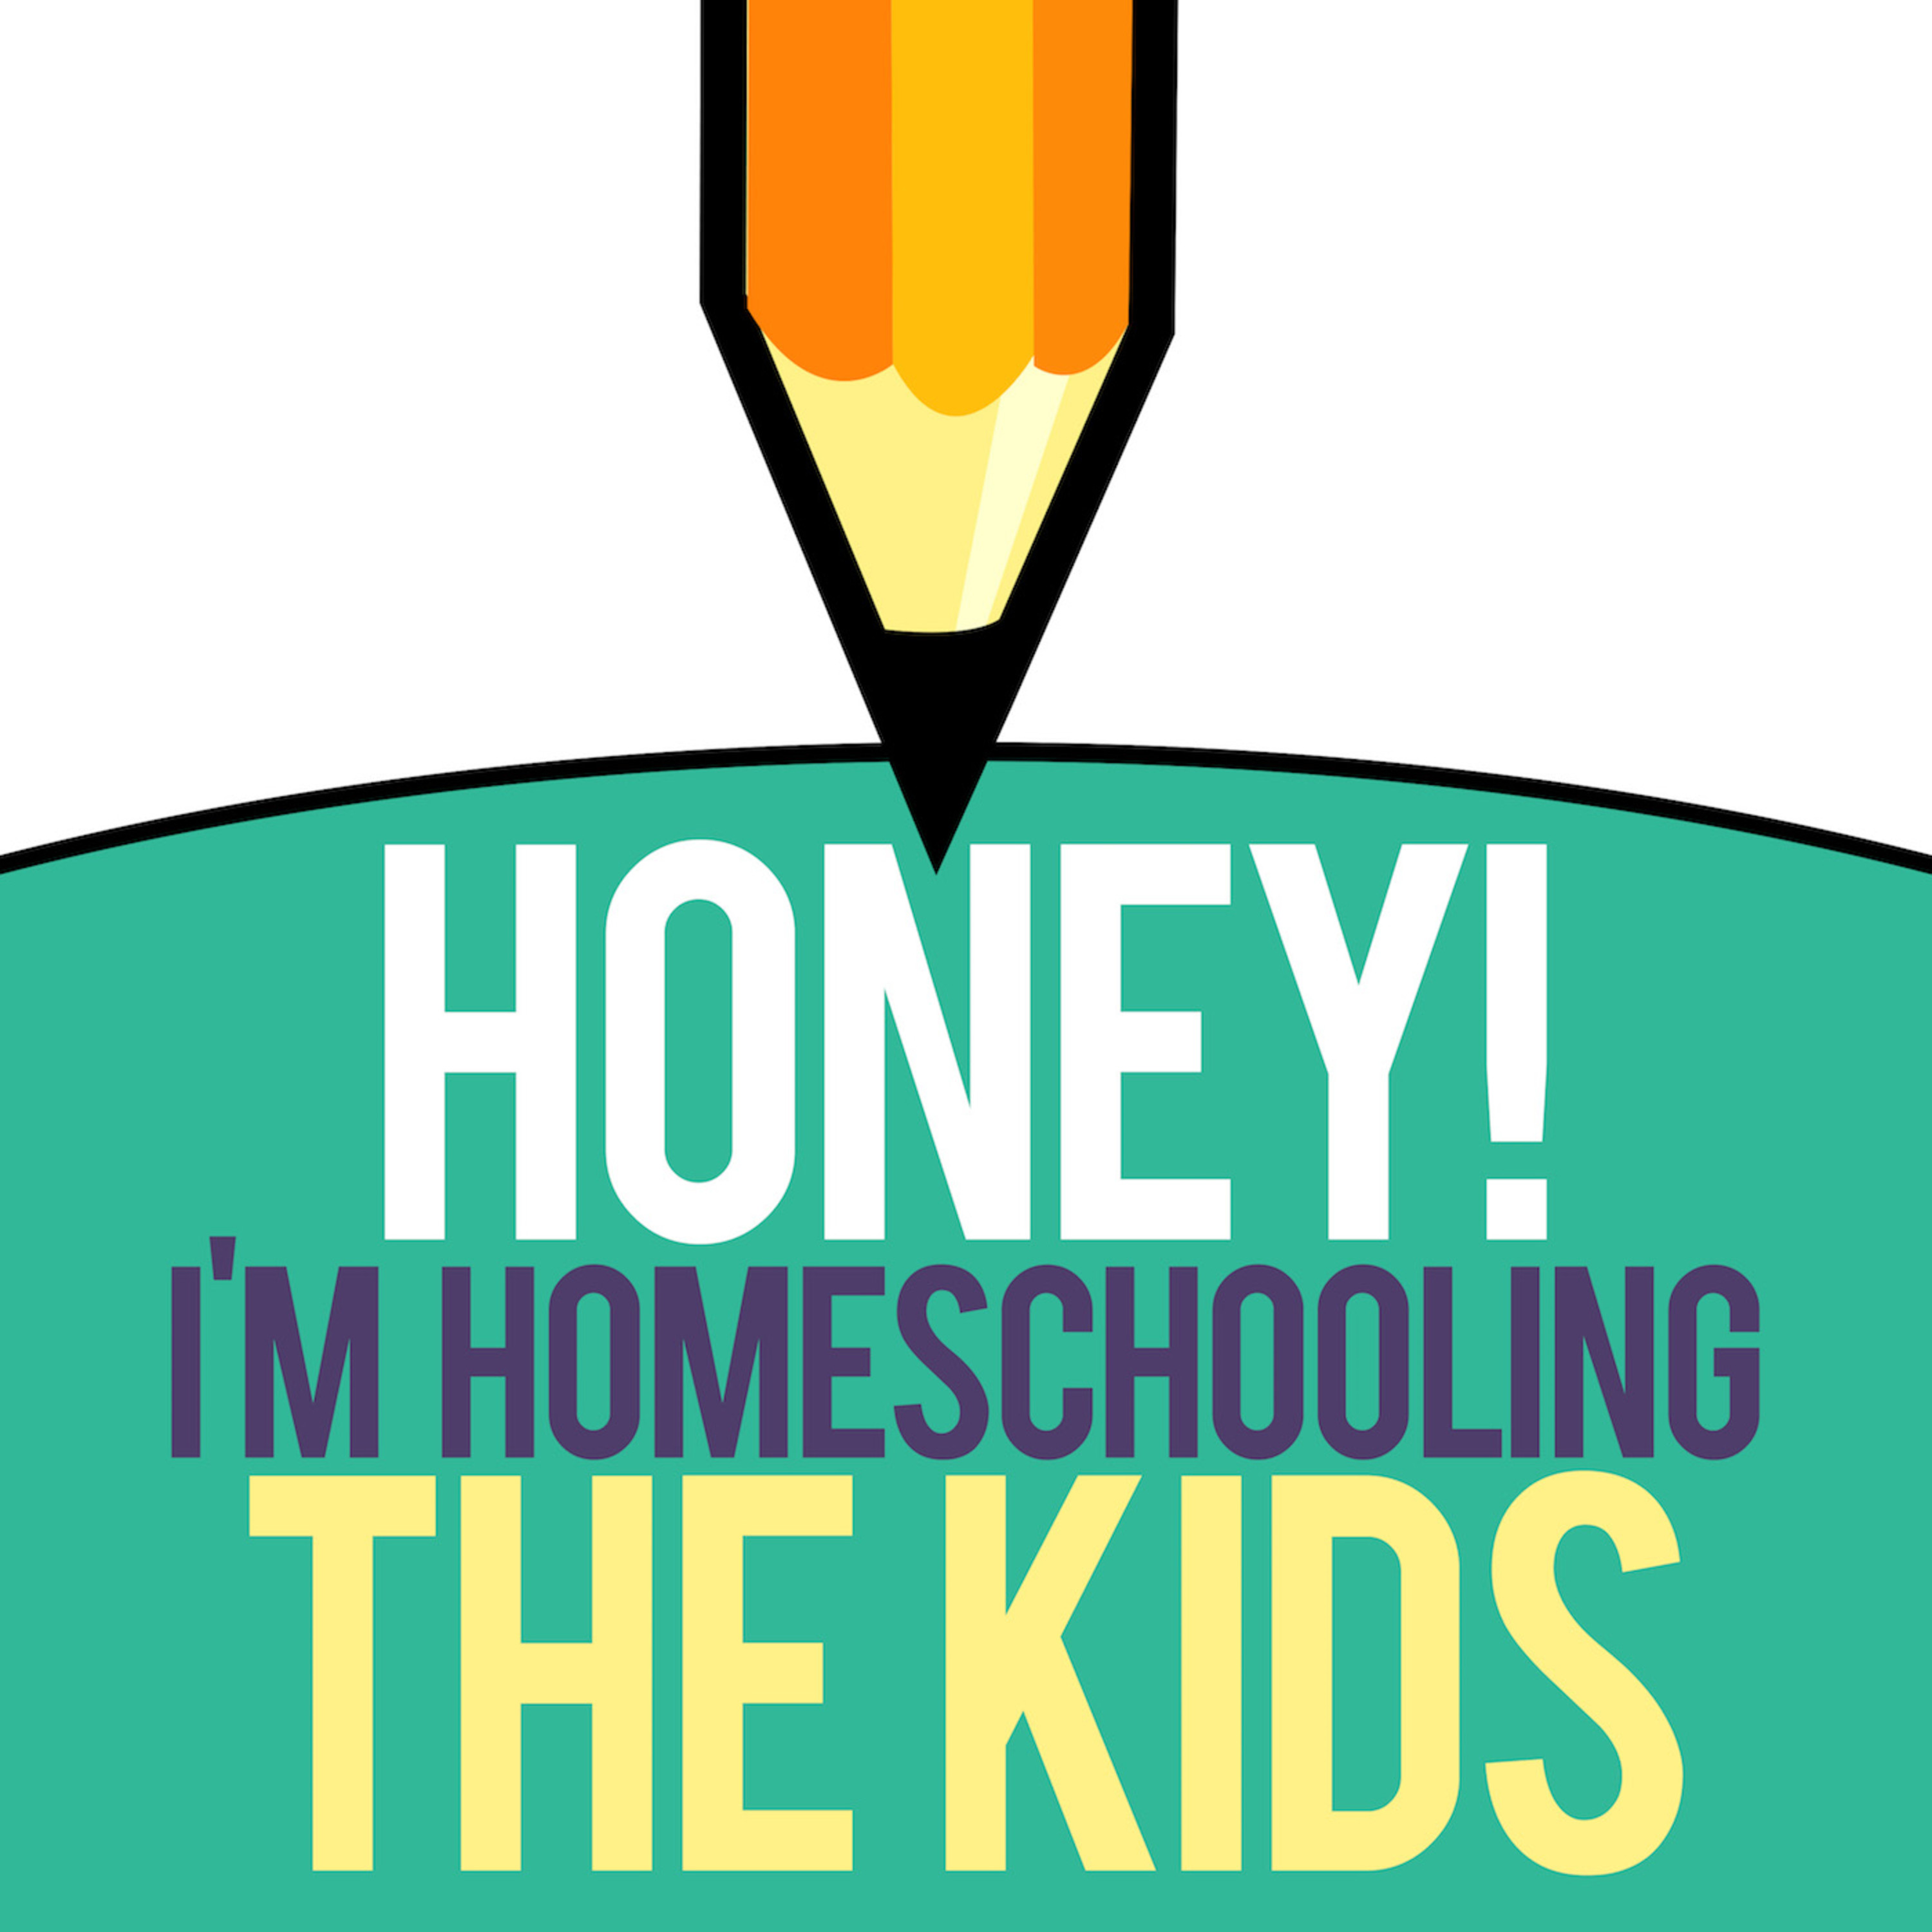 “What My Daughter Thinks About Homeschooling”